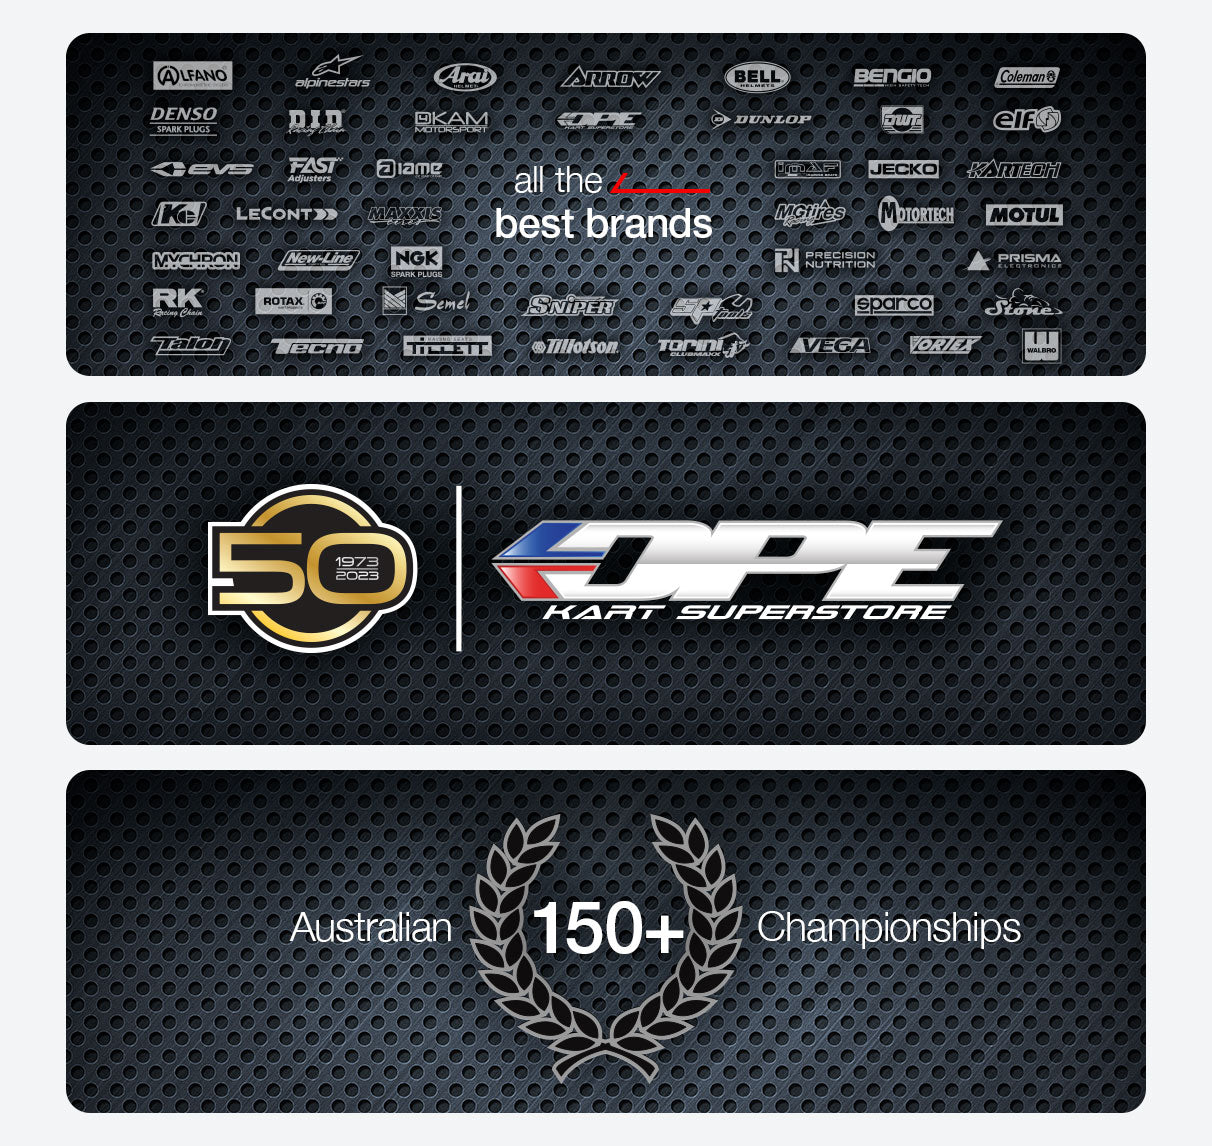 DPE delivering the world's best karting products since 1973